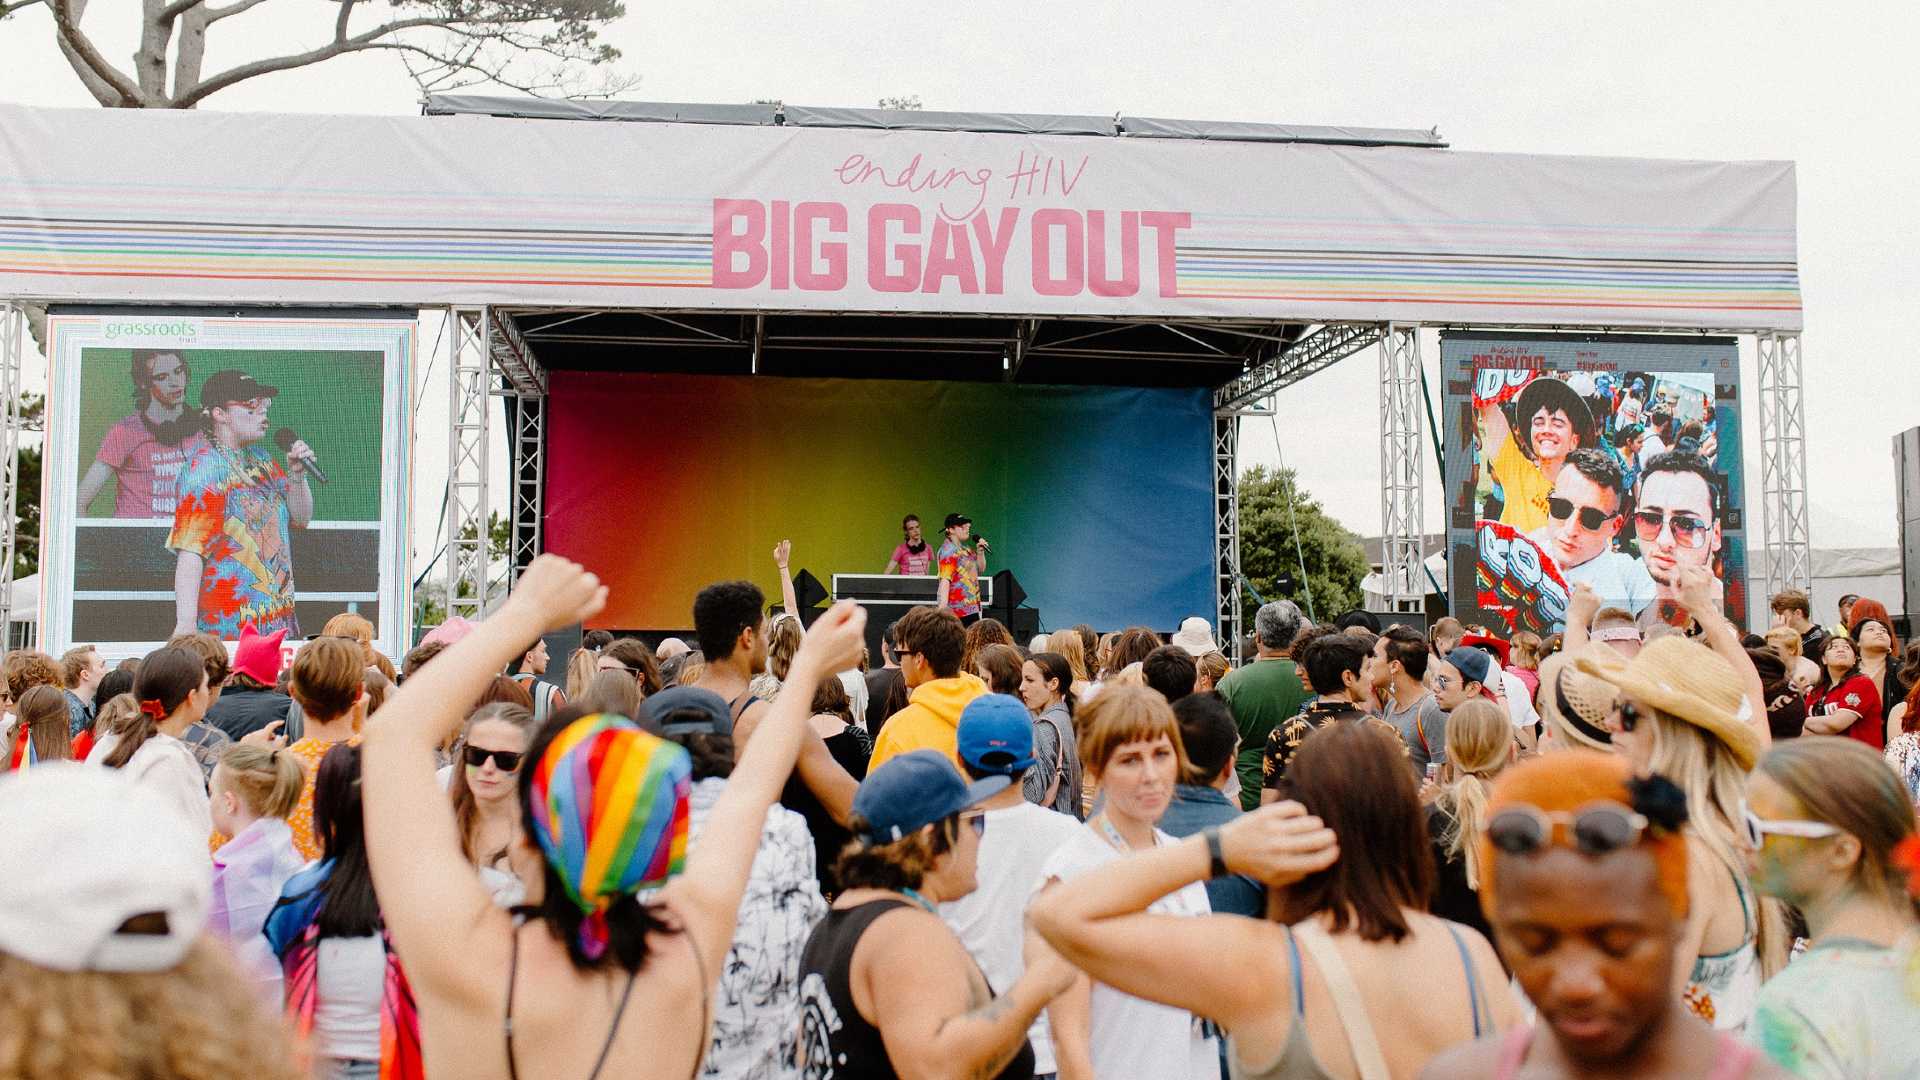 Rainbow Celebration Big Gay Out Is Returning as Part of Auckland Pride Festival This Month